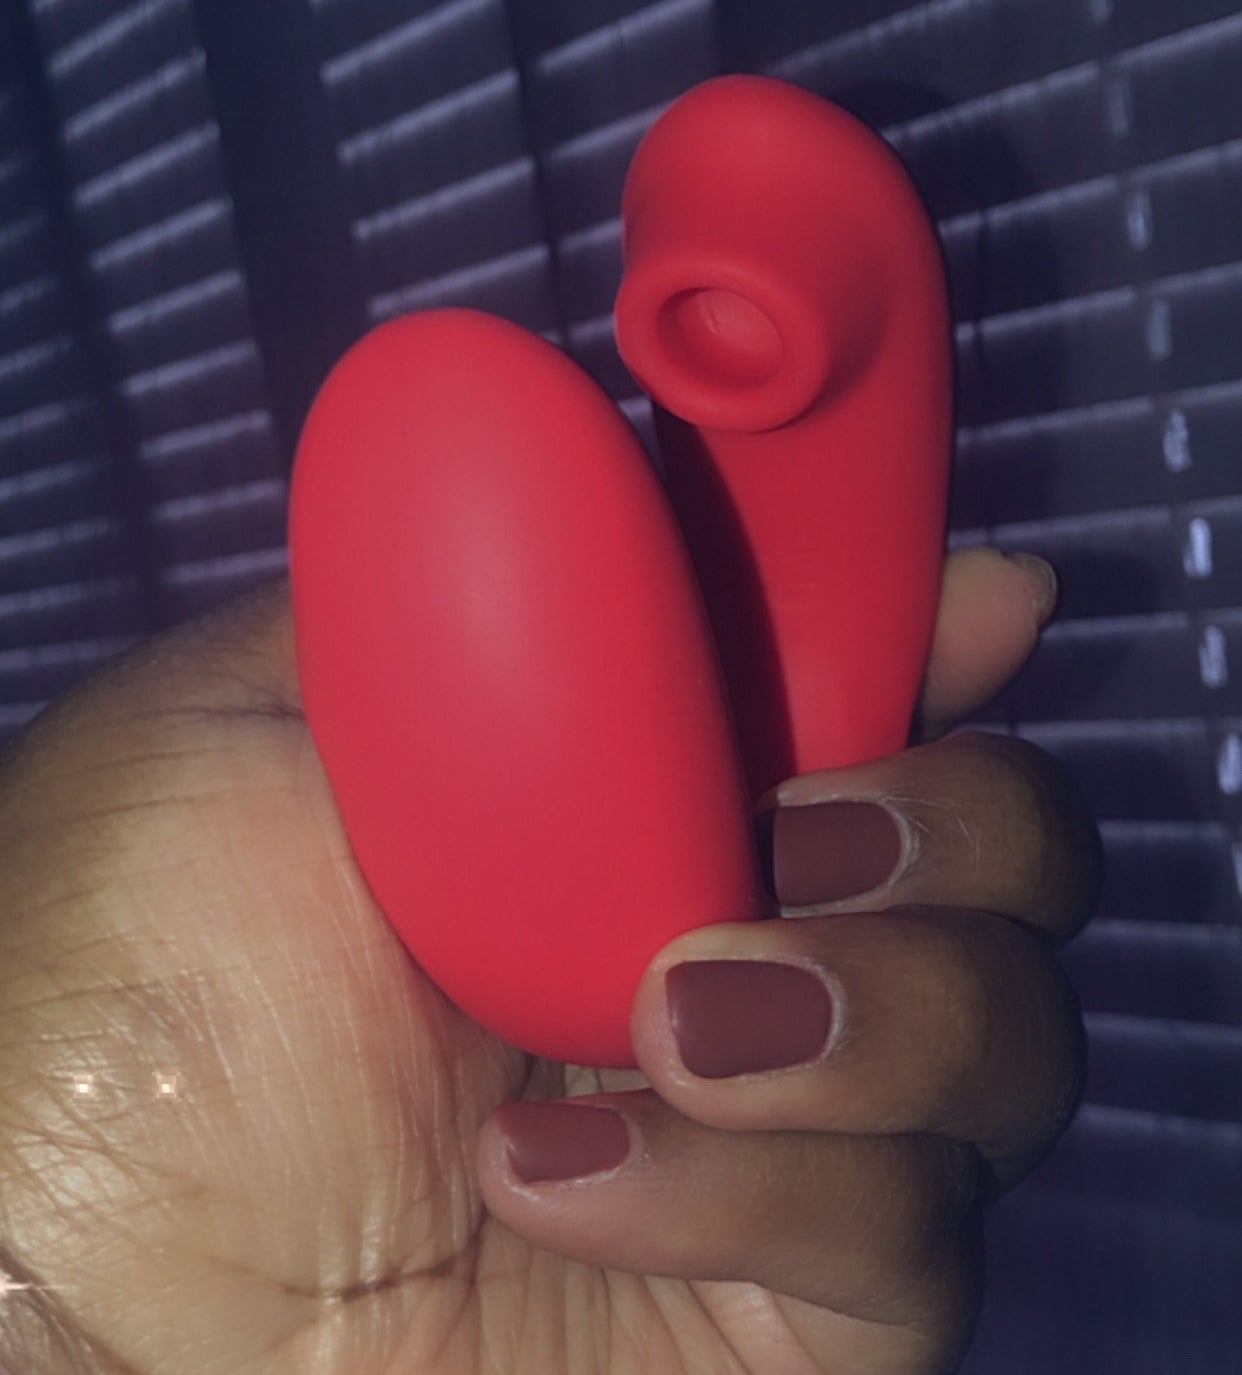 Reviewer holding vibrator to display suction opening